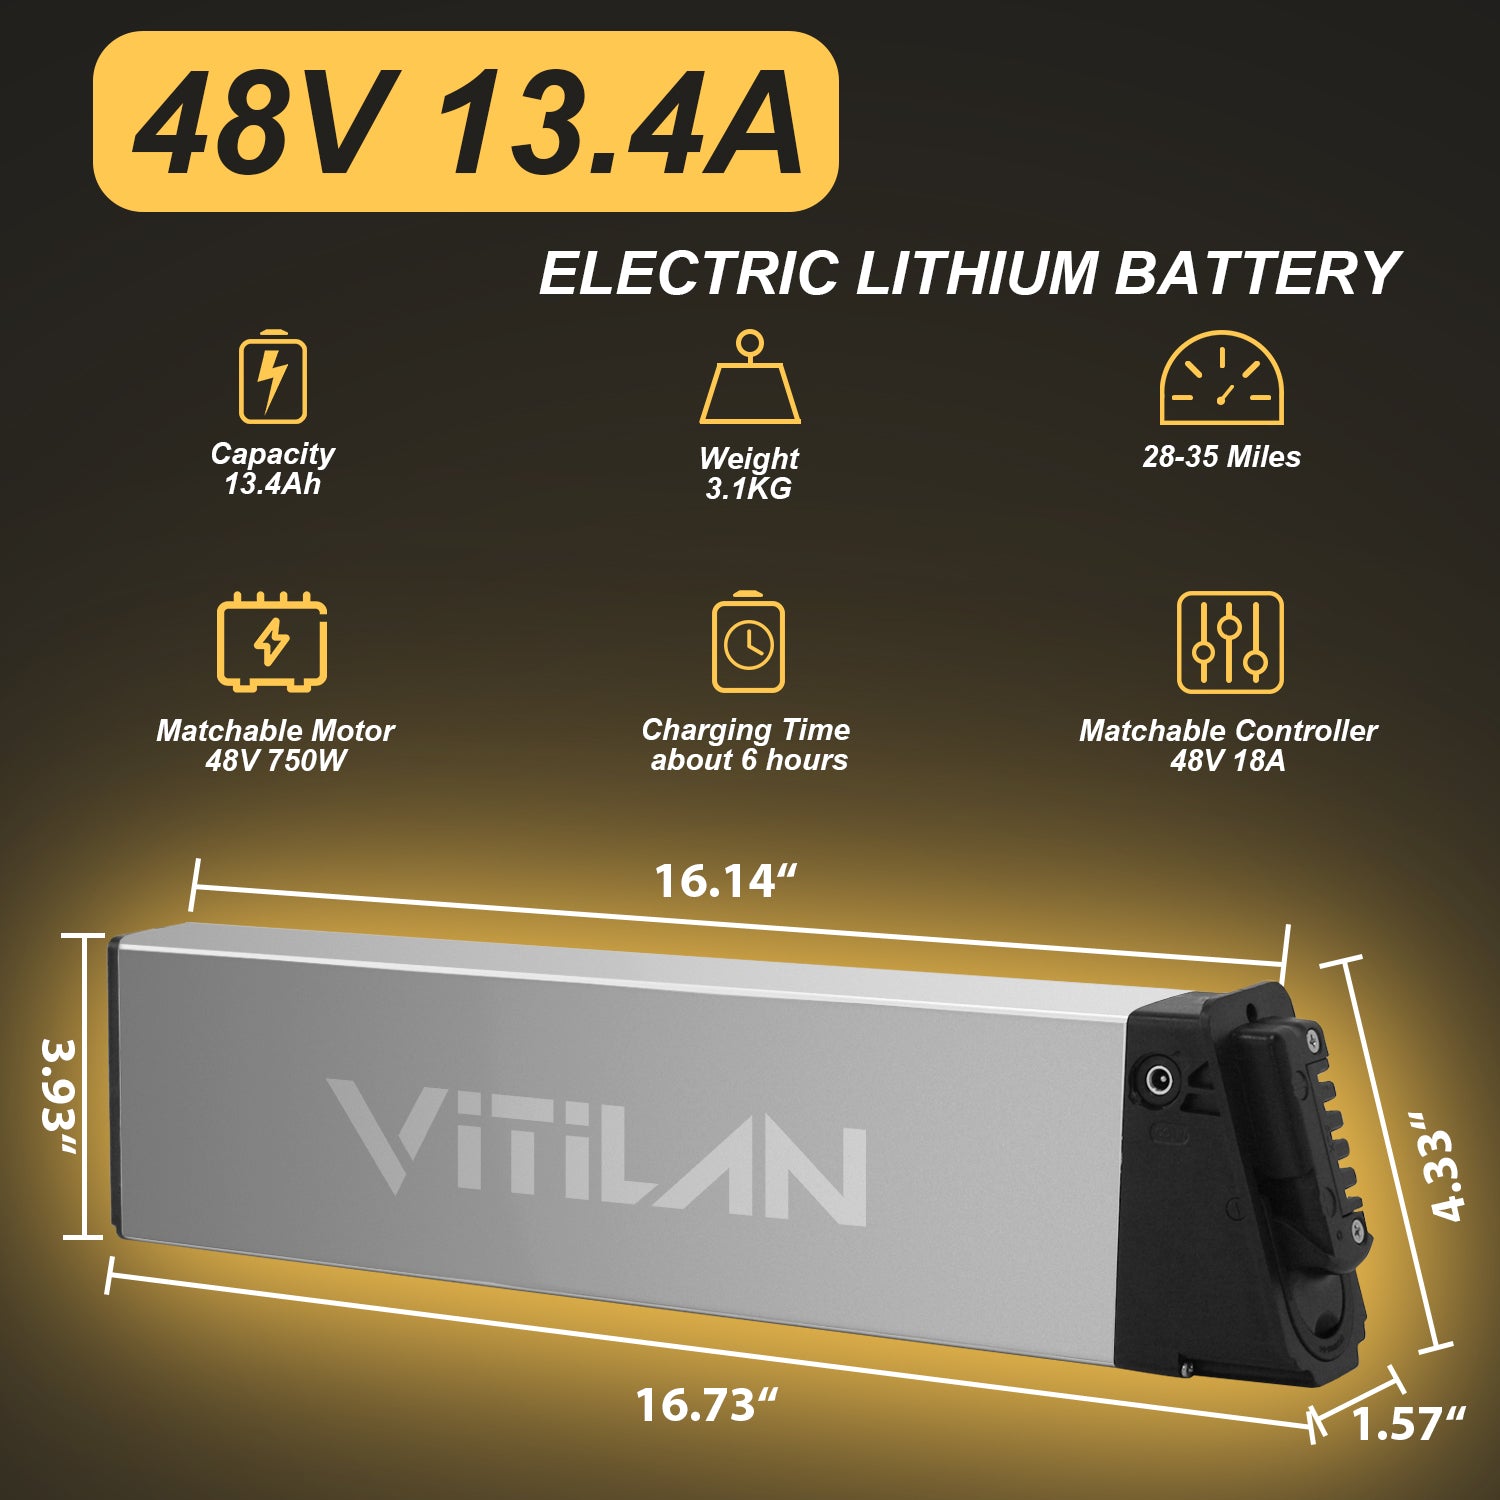 V3 Series Power Swappable Ebike Battery with Charge